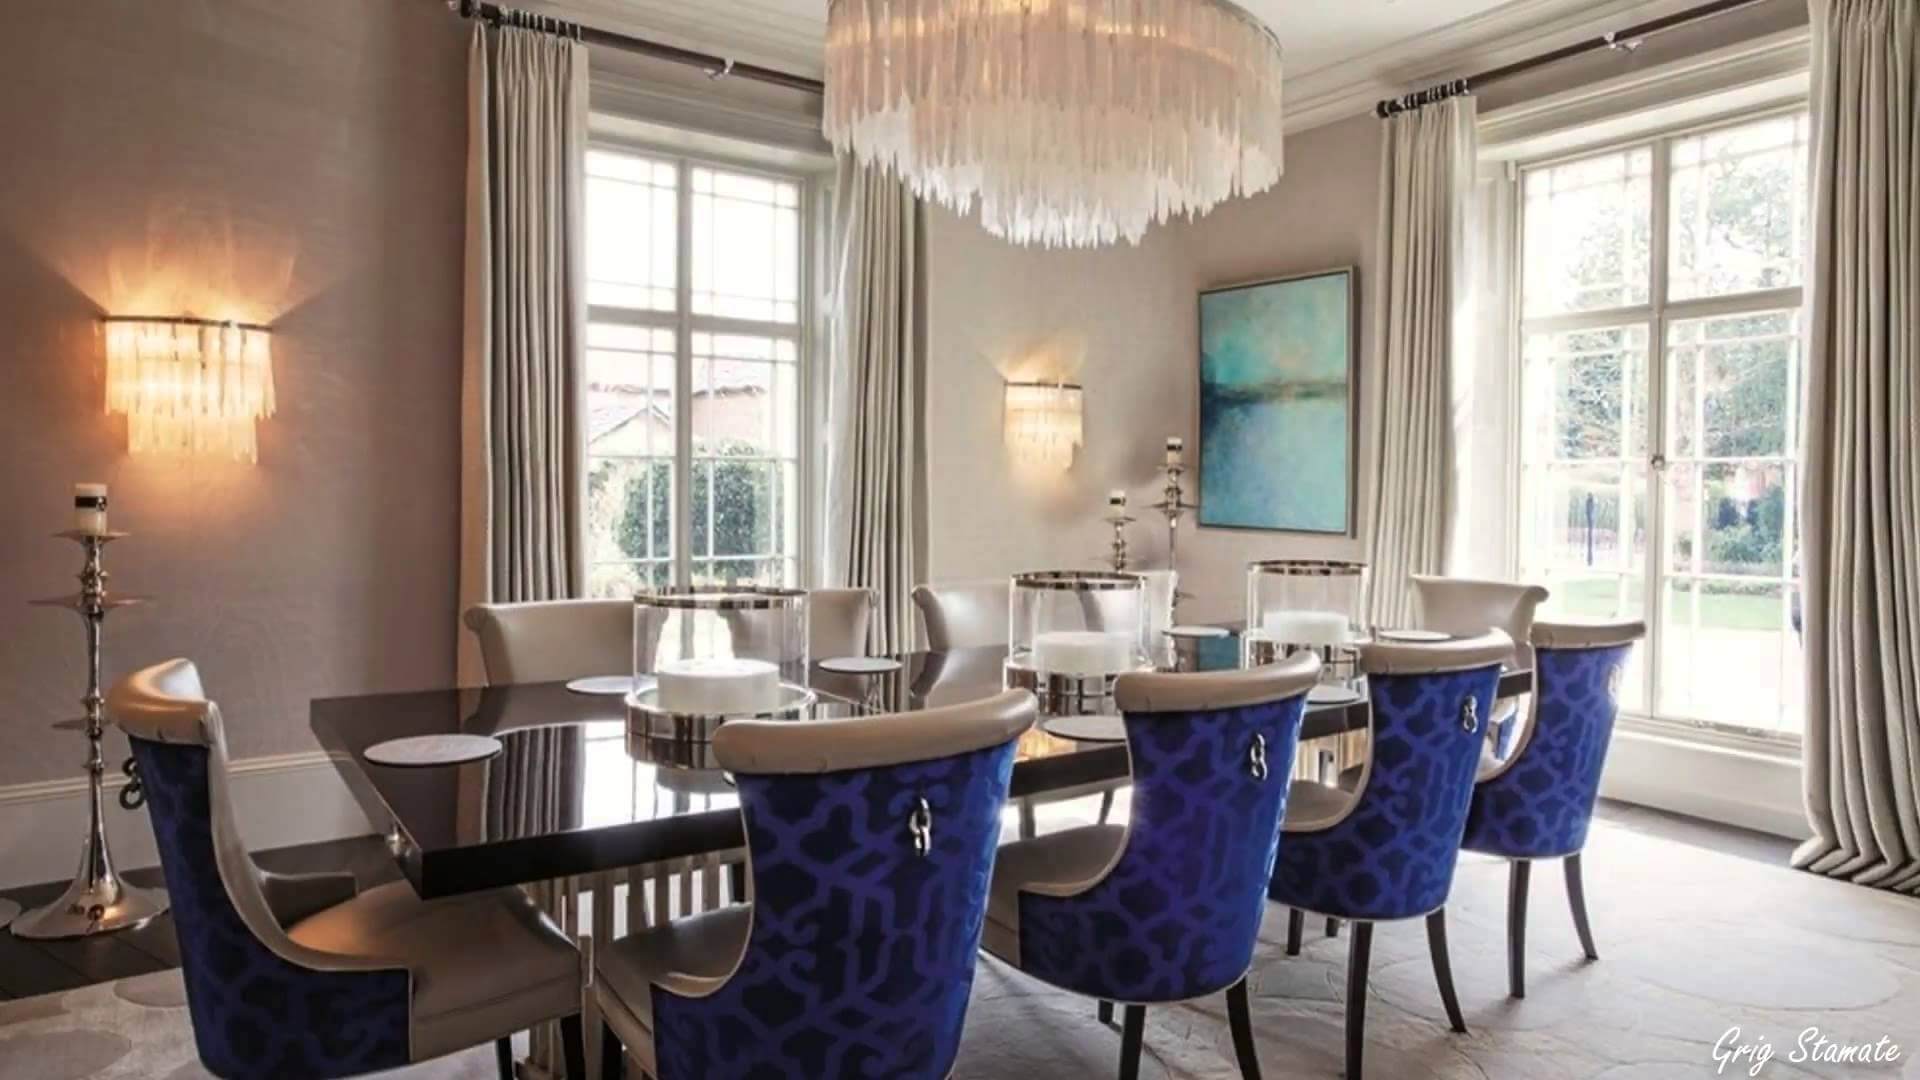 A dining room with blue chairs and a chandelier
